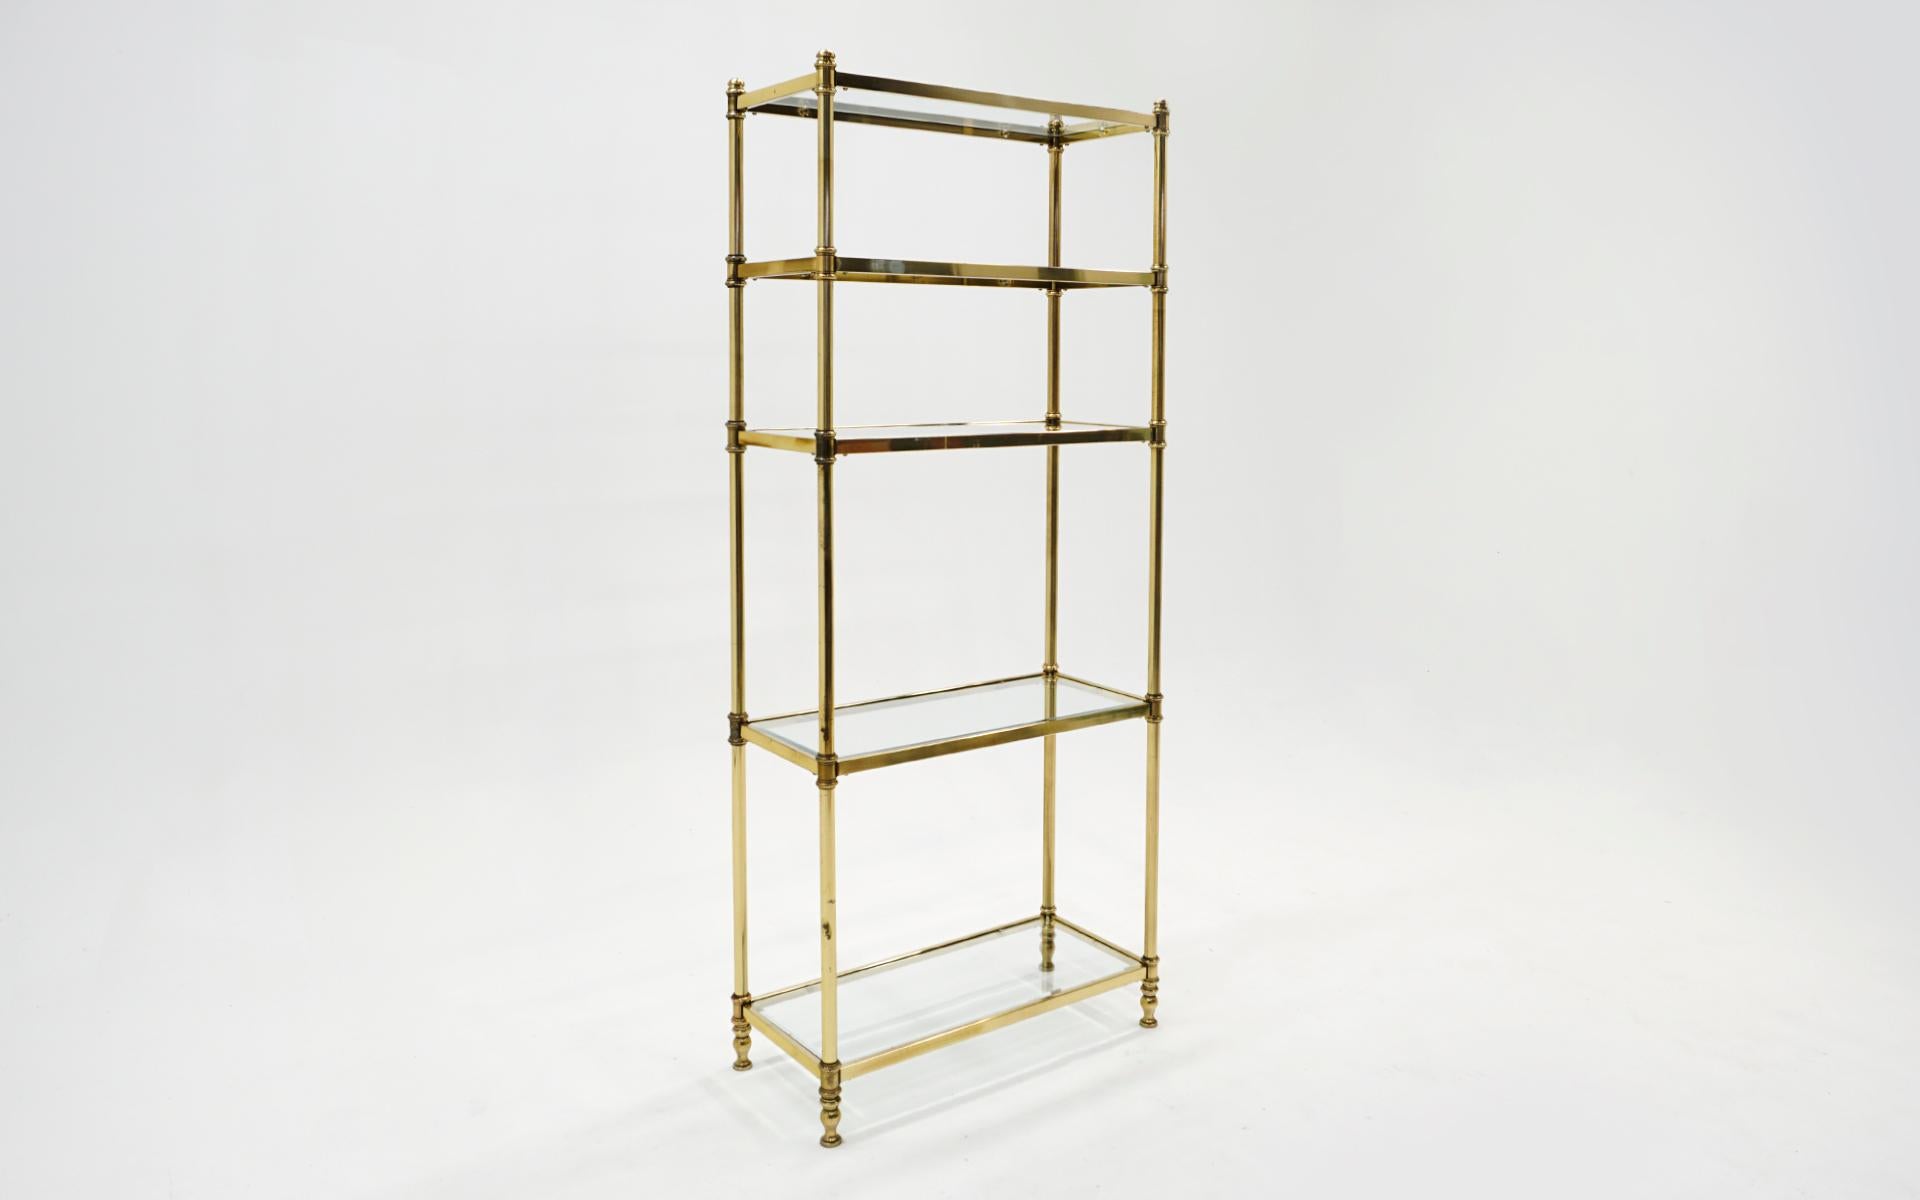 Brass and glass etagere / storage / display shelves. Signs of wear and loss of brass finish. Overall a very nice vintage appearance.